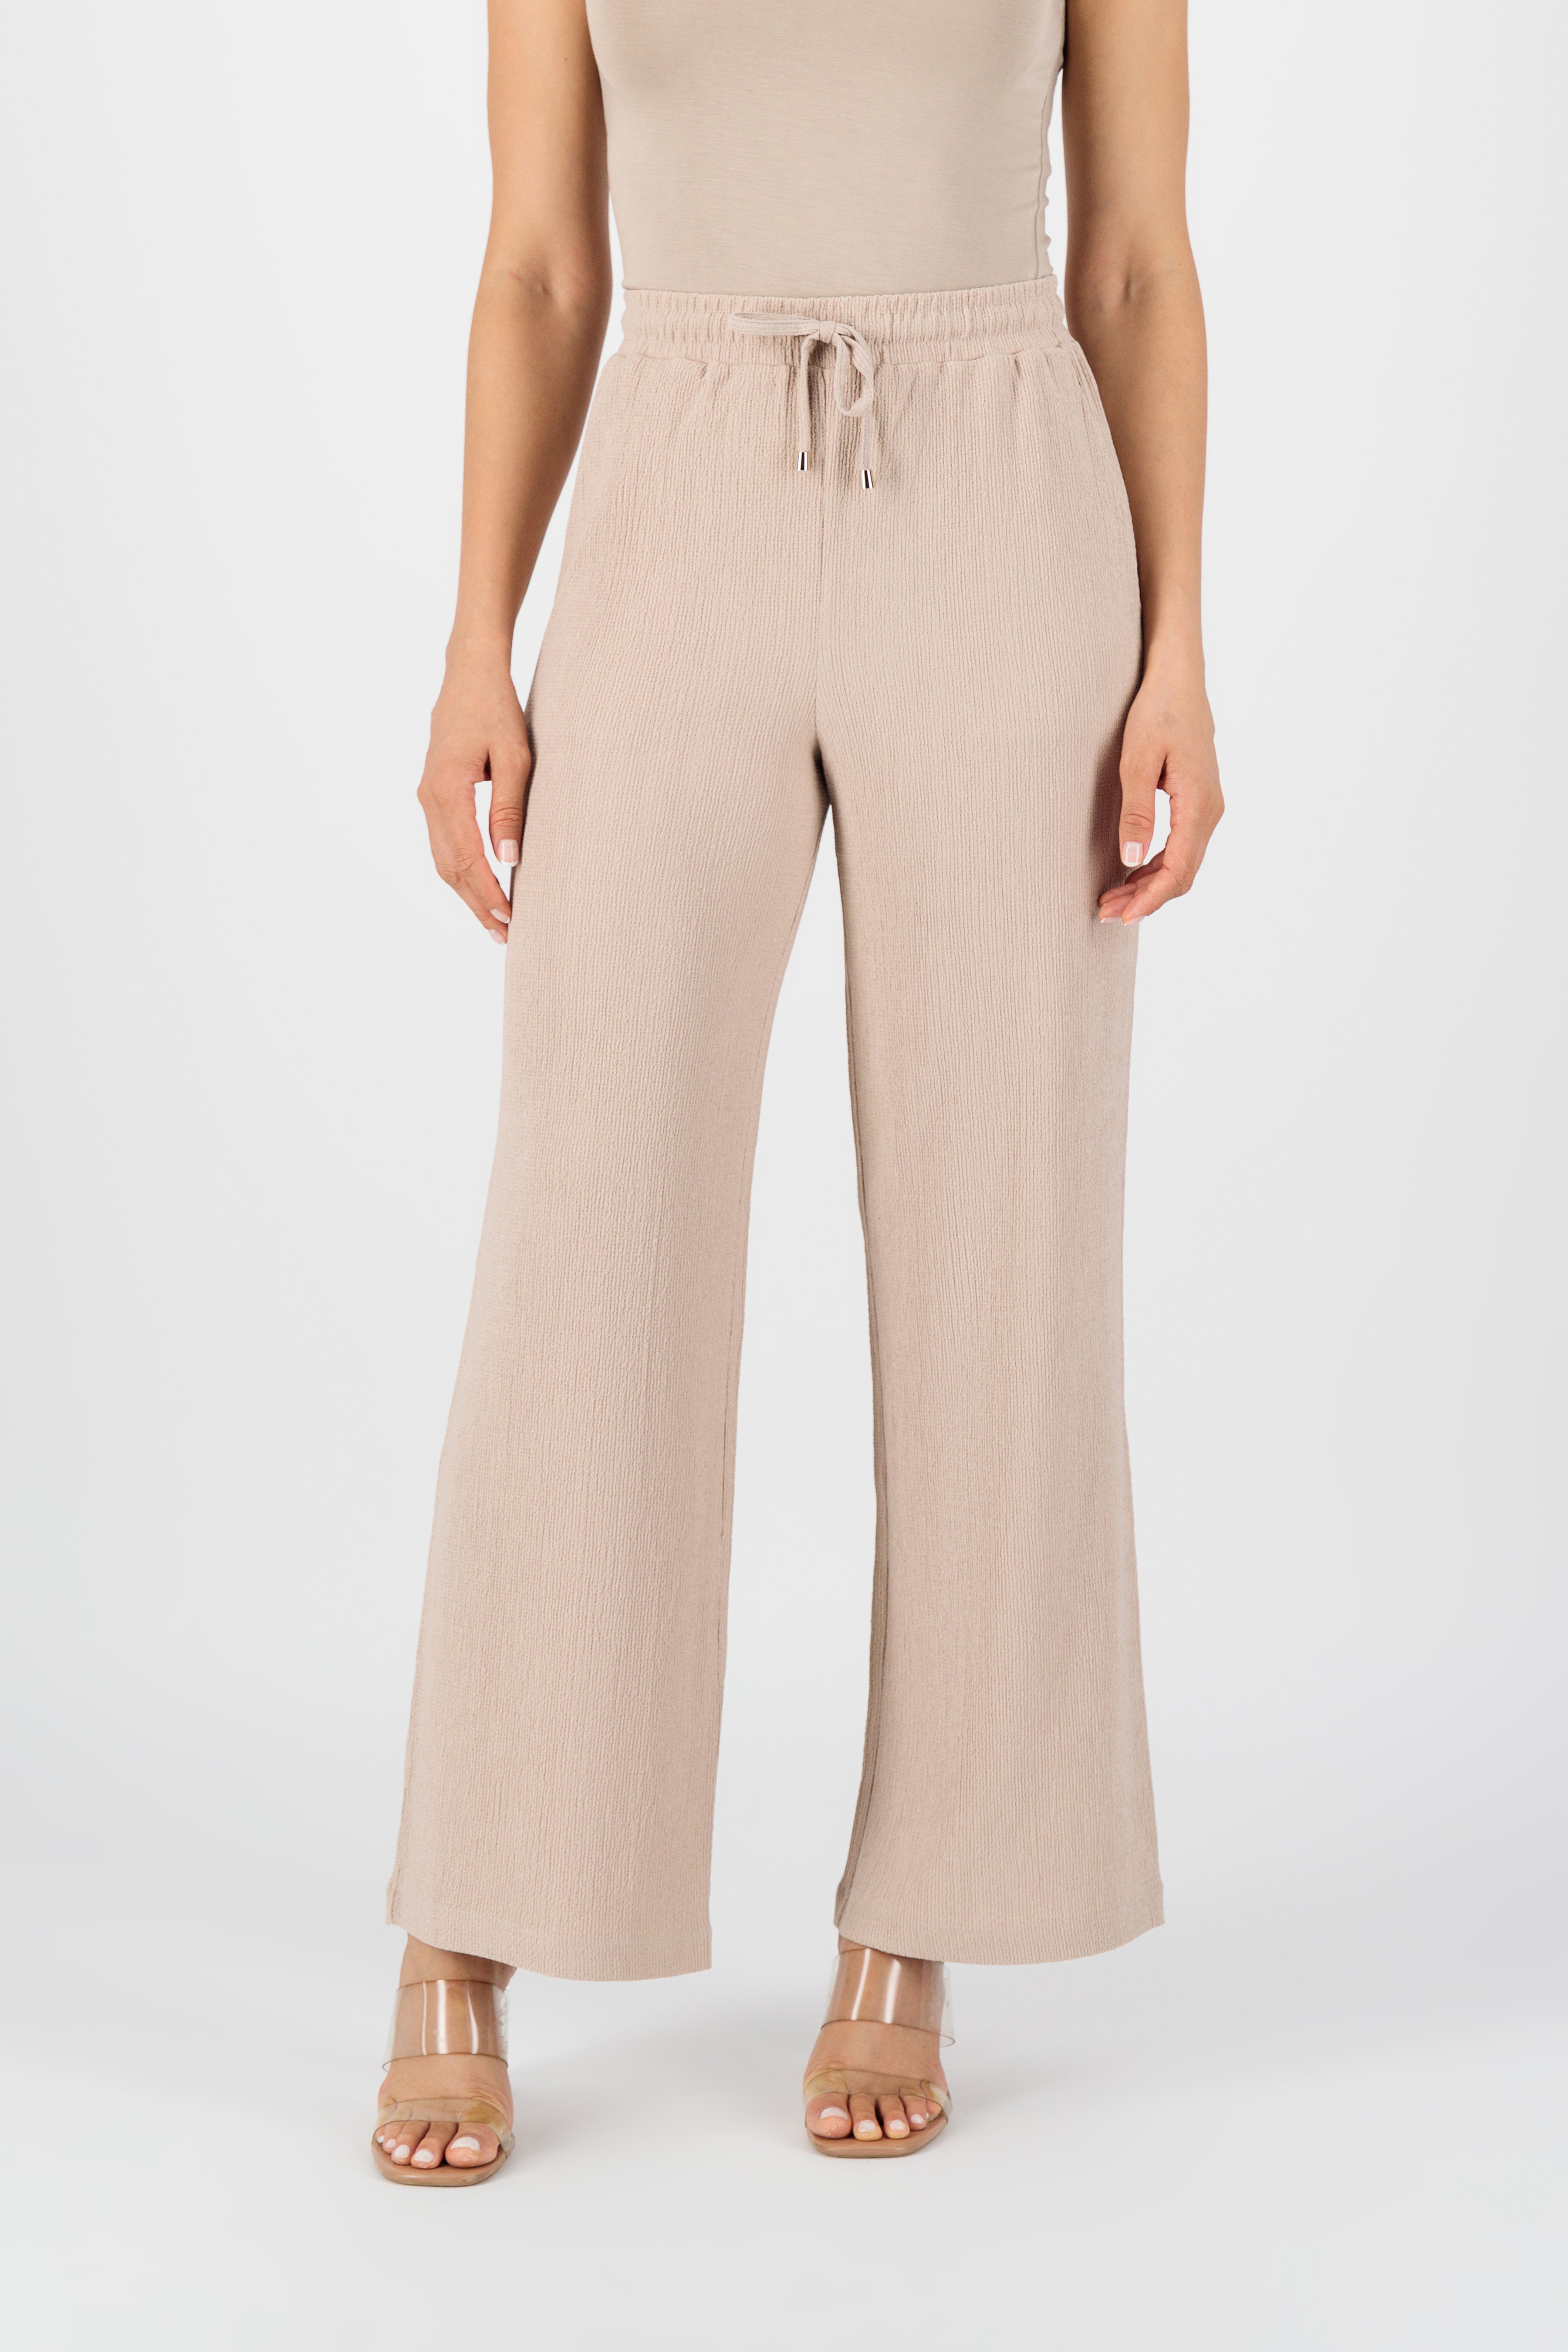 CA - Relaxed Fit Pants - Shell